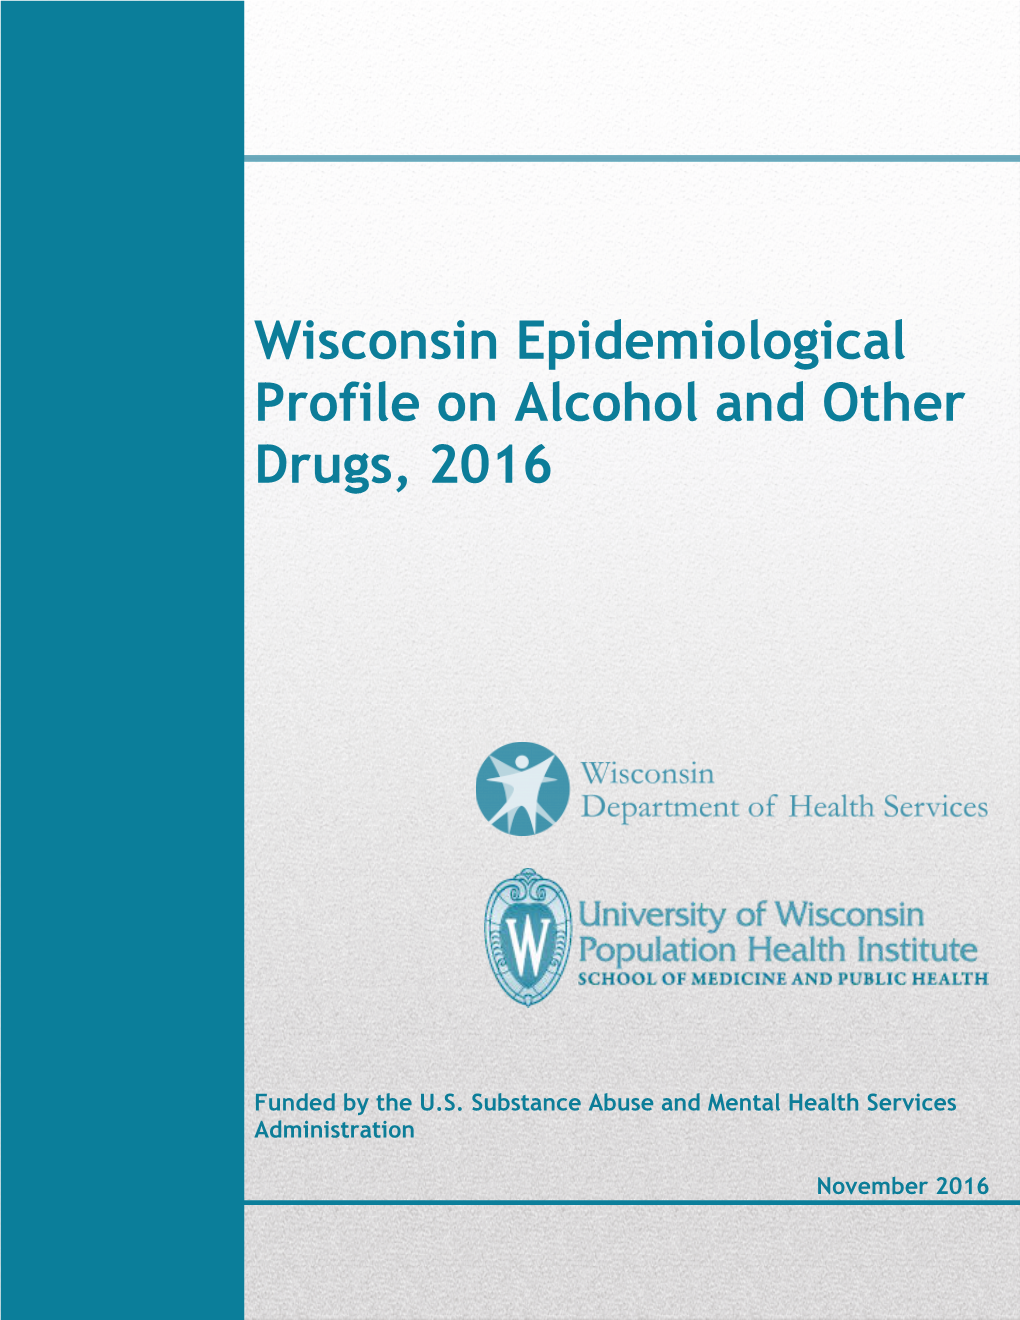 Wisconsin Epidemiological Profile on Alcohol and Other Drugs, 2016